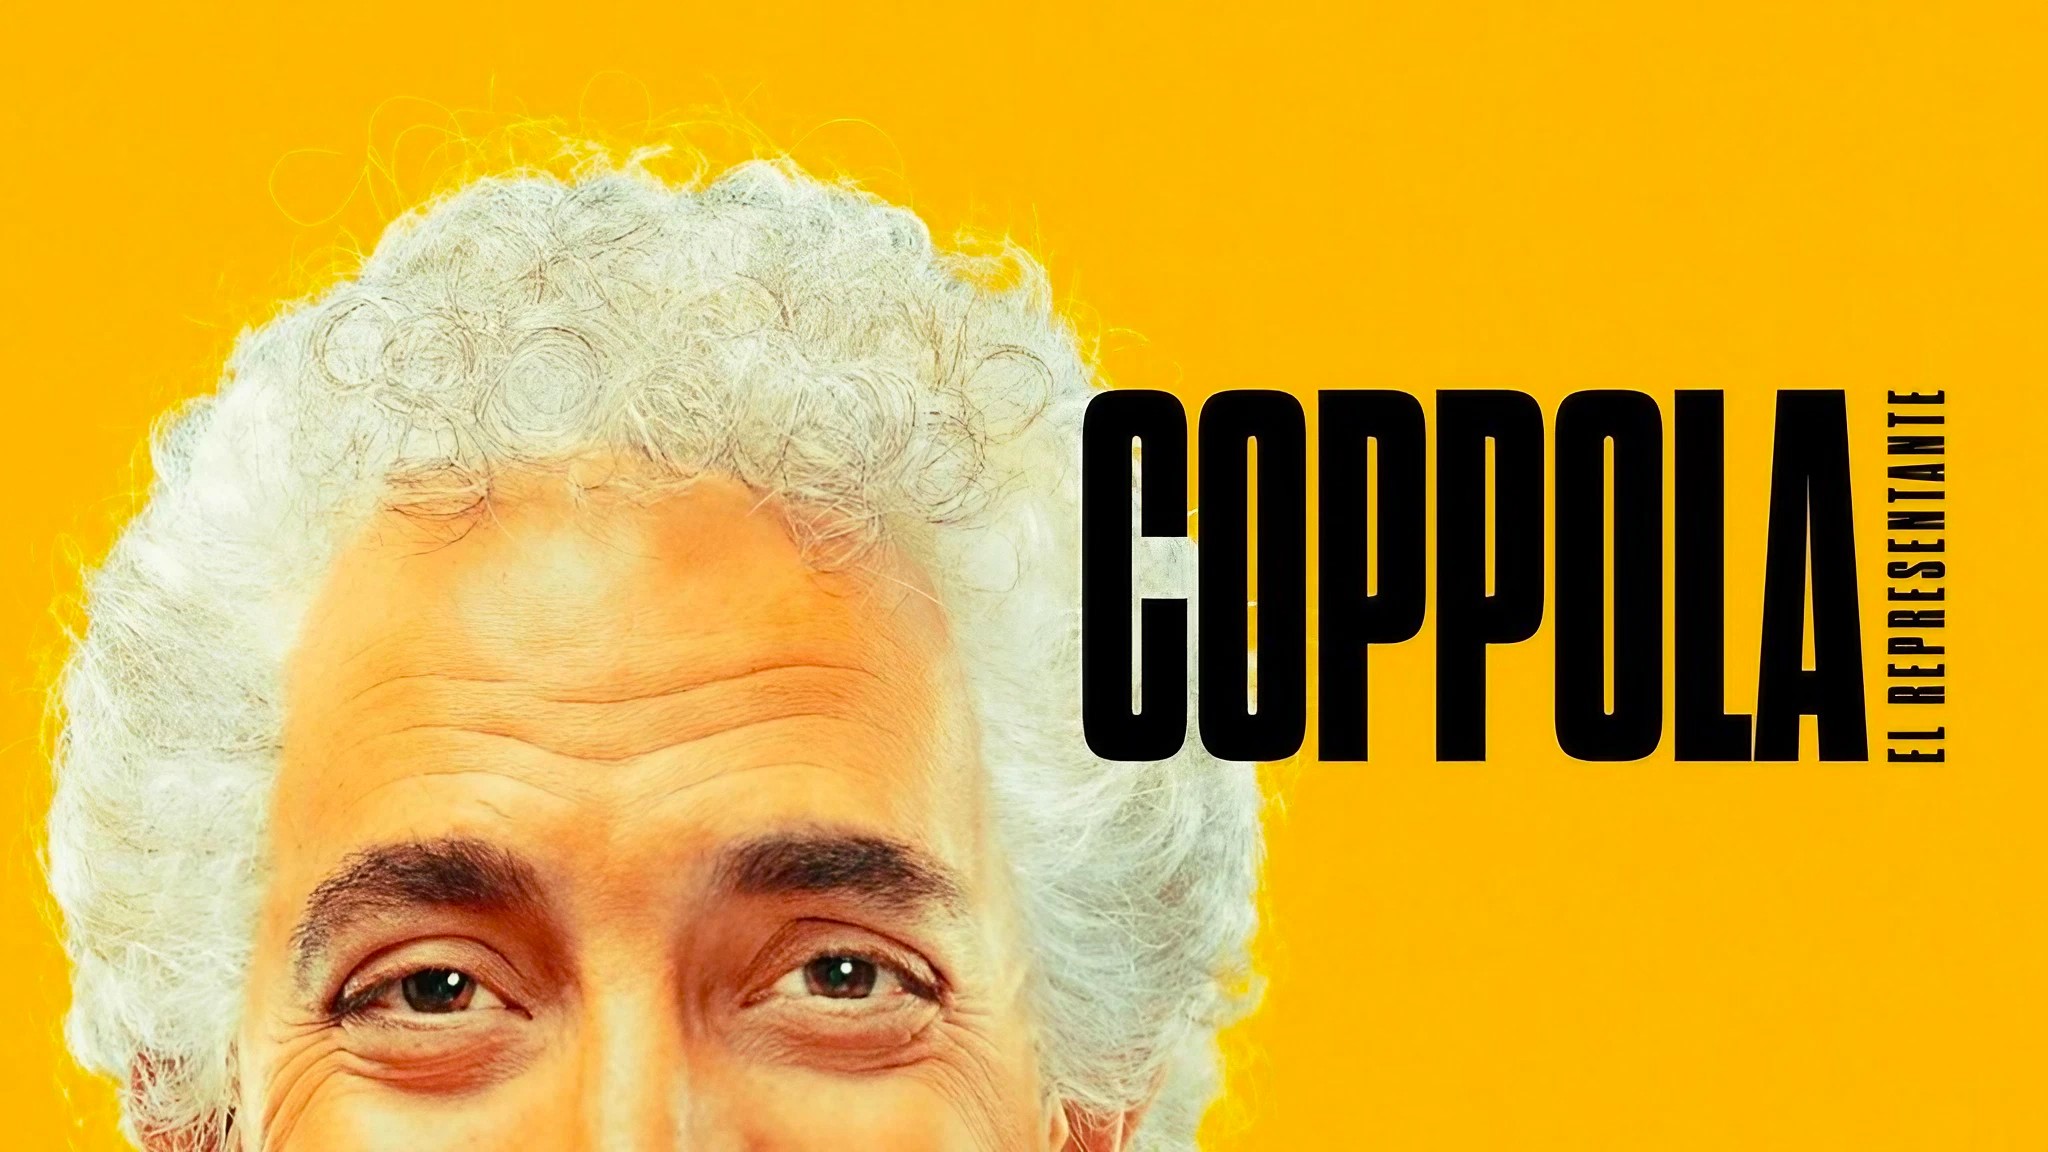 is Coppola, The Agent based on a true story